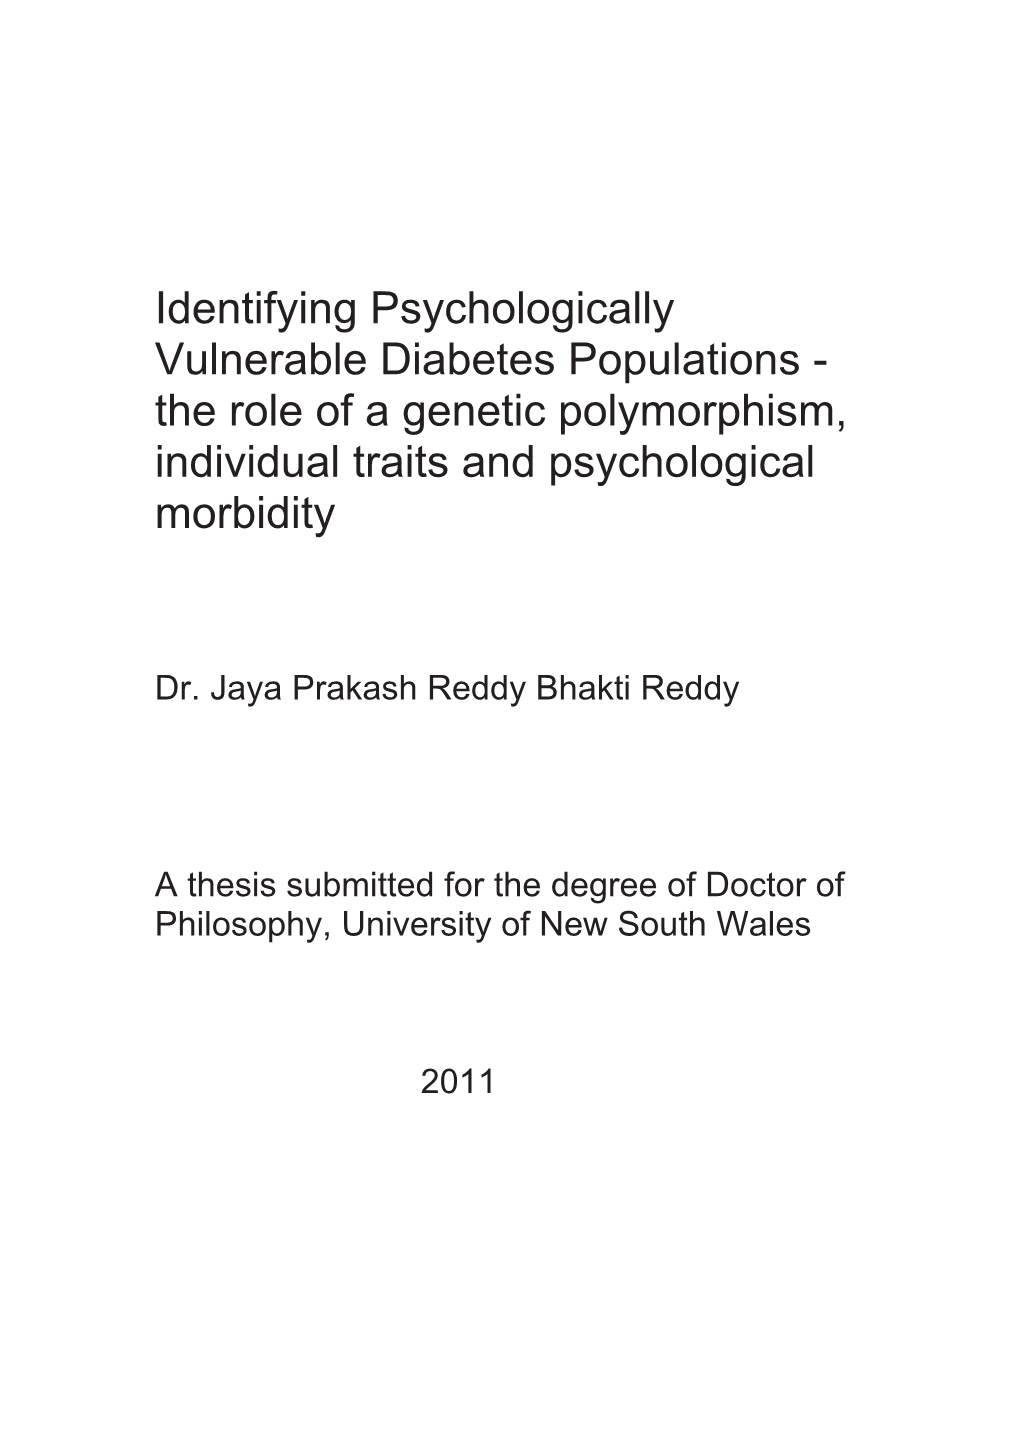 Identifying Psychologically Vulnerable Diabetes Populations - the Role of a Genetic Polymorphism, Individual Traits and Psychological Morbidity